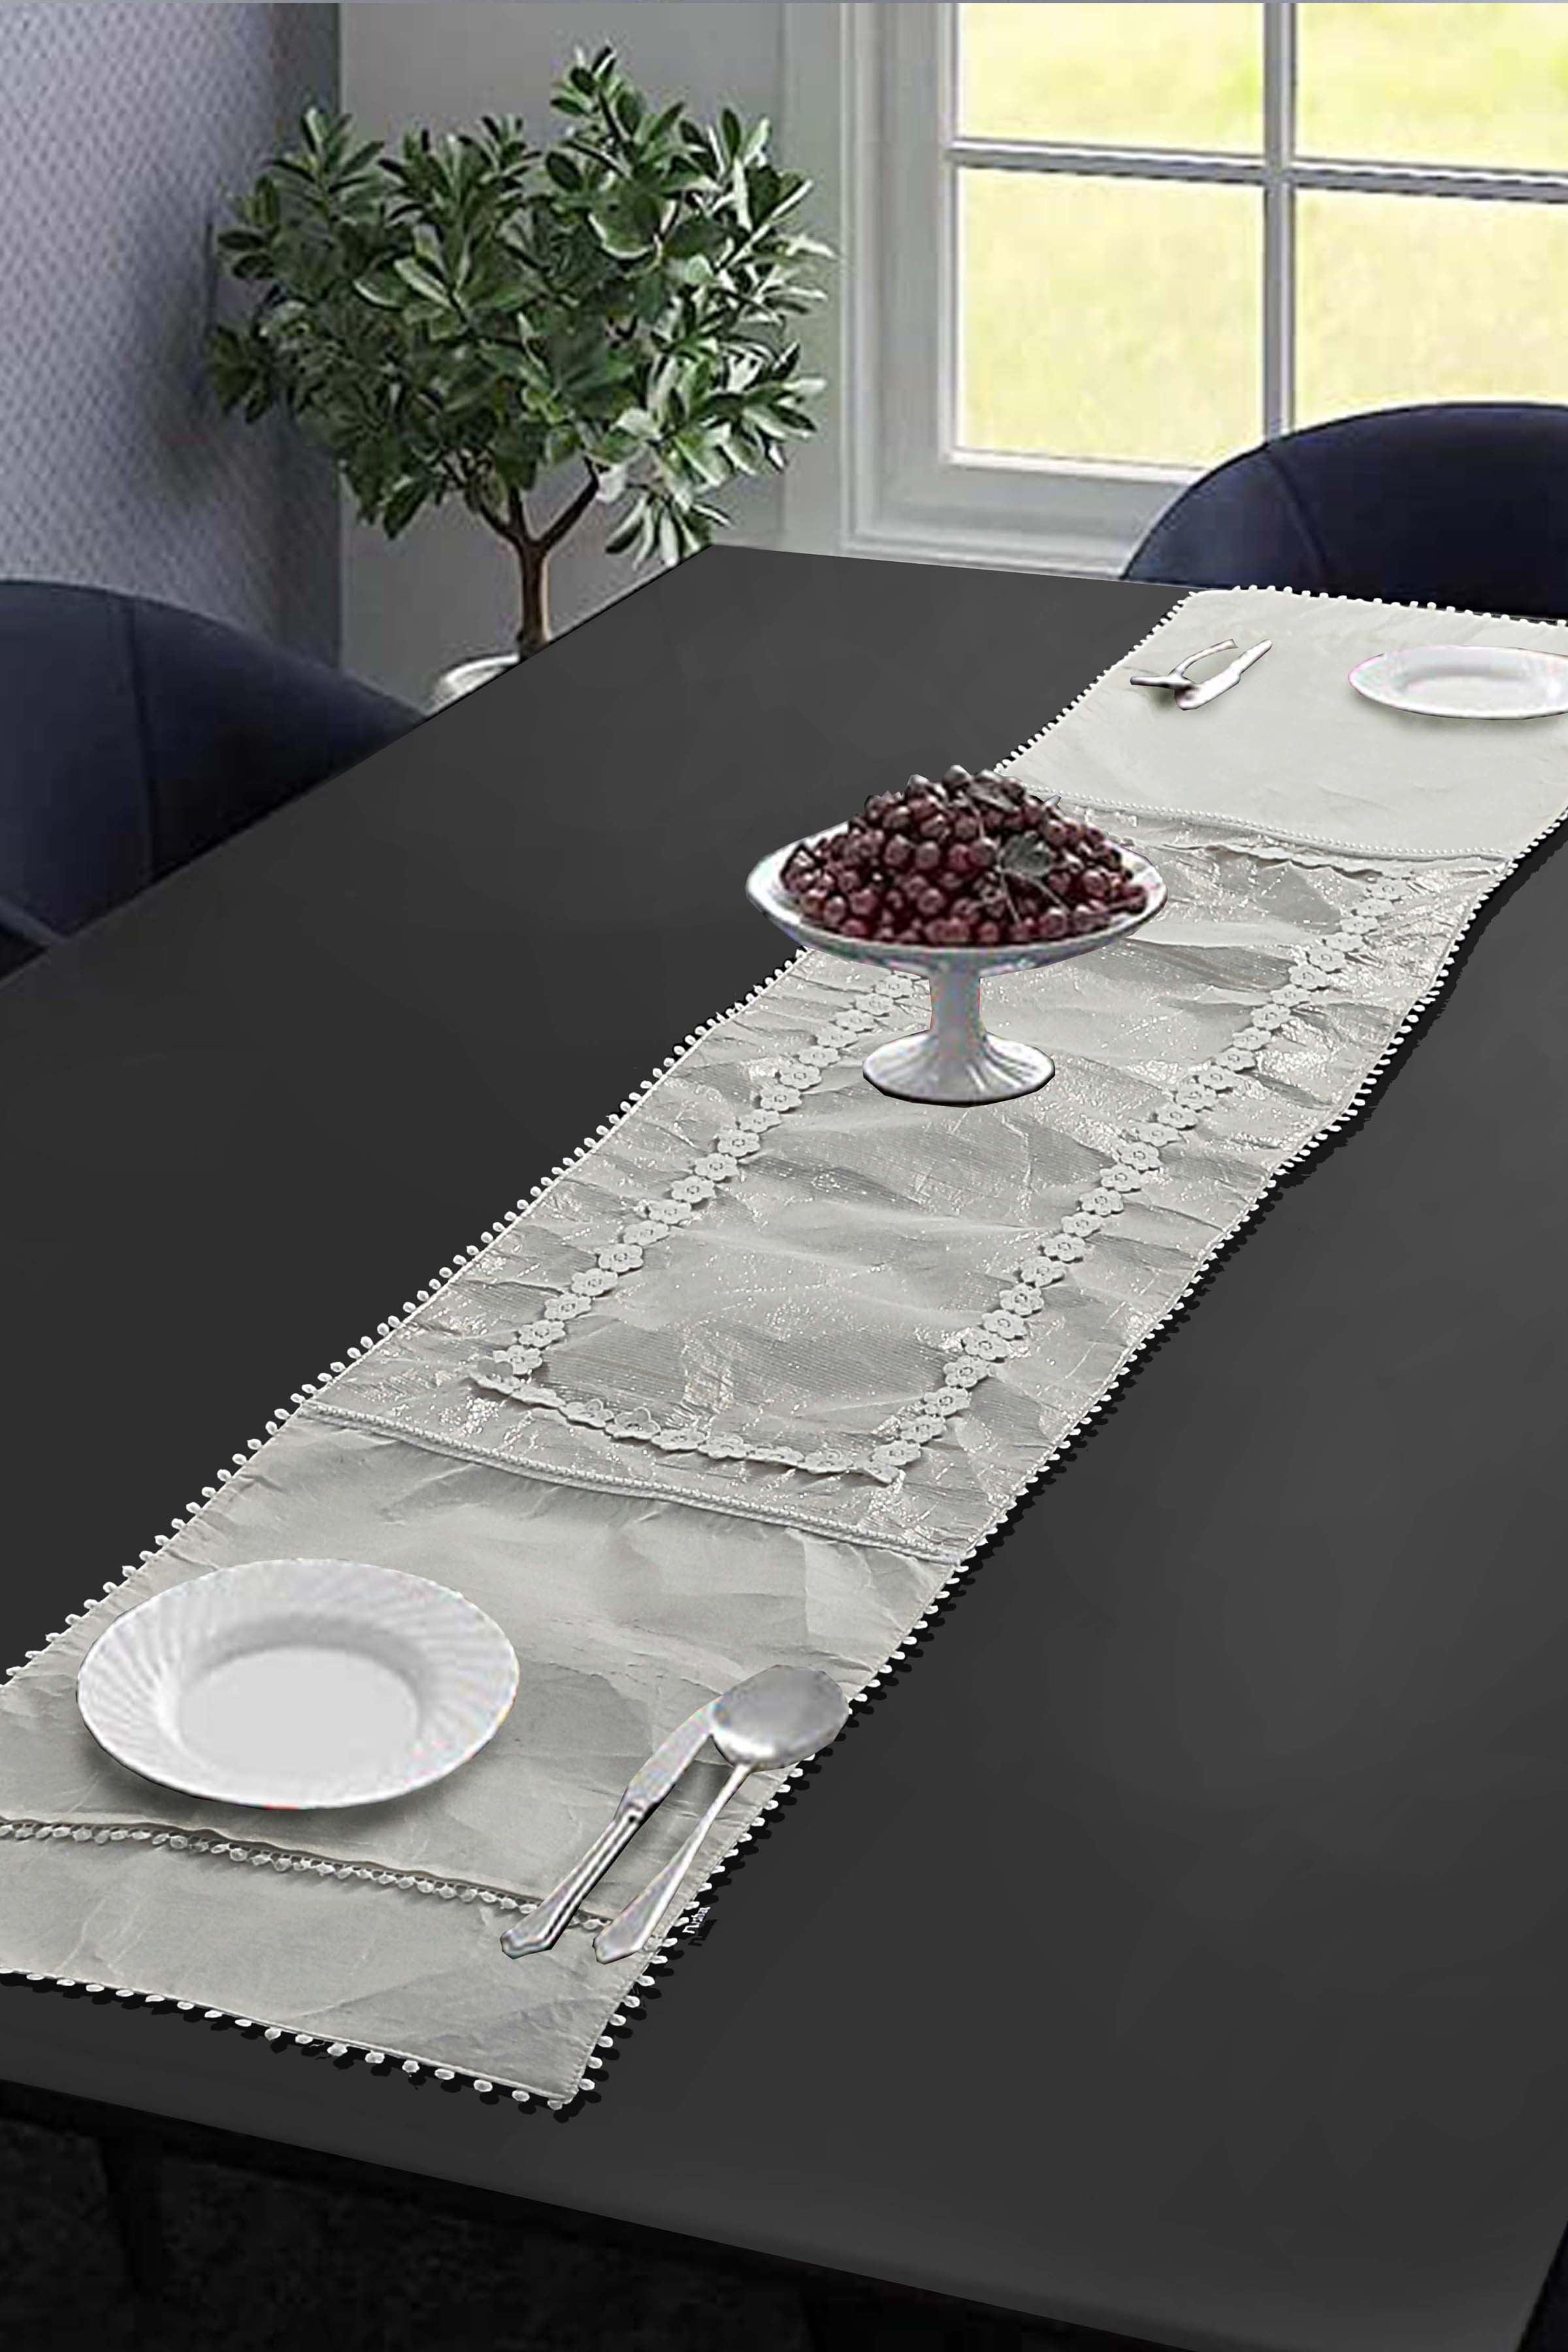 MOTHER OF PEARL TABLE RUNNER 1 PIECE, UNDEFINED, NISHAT